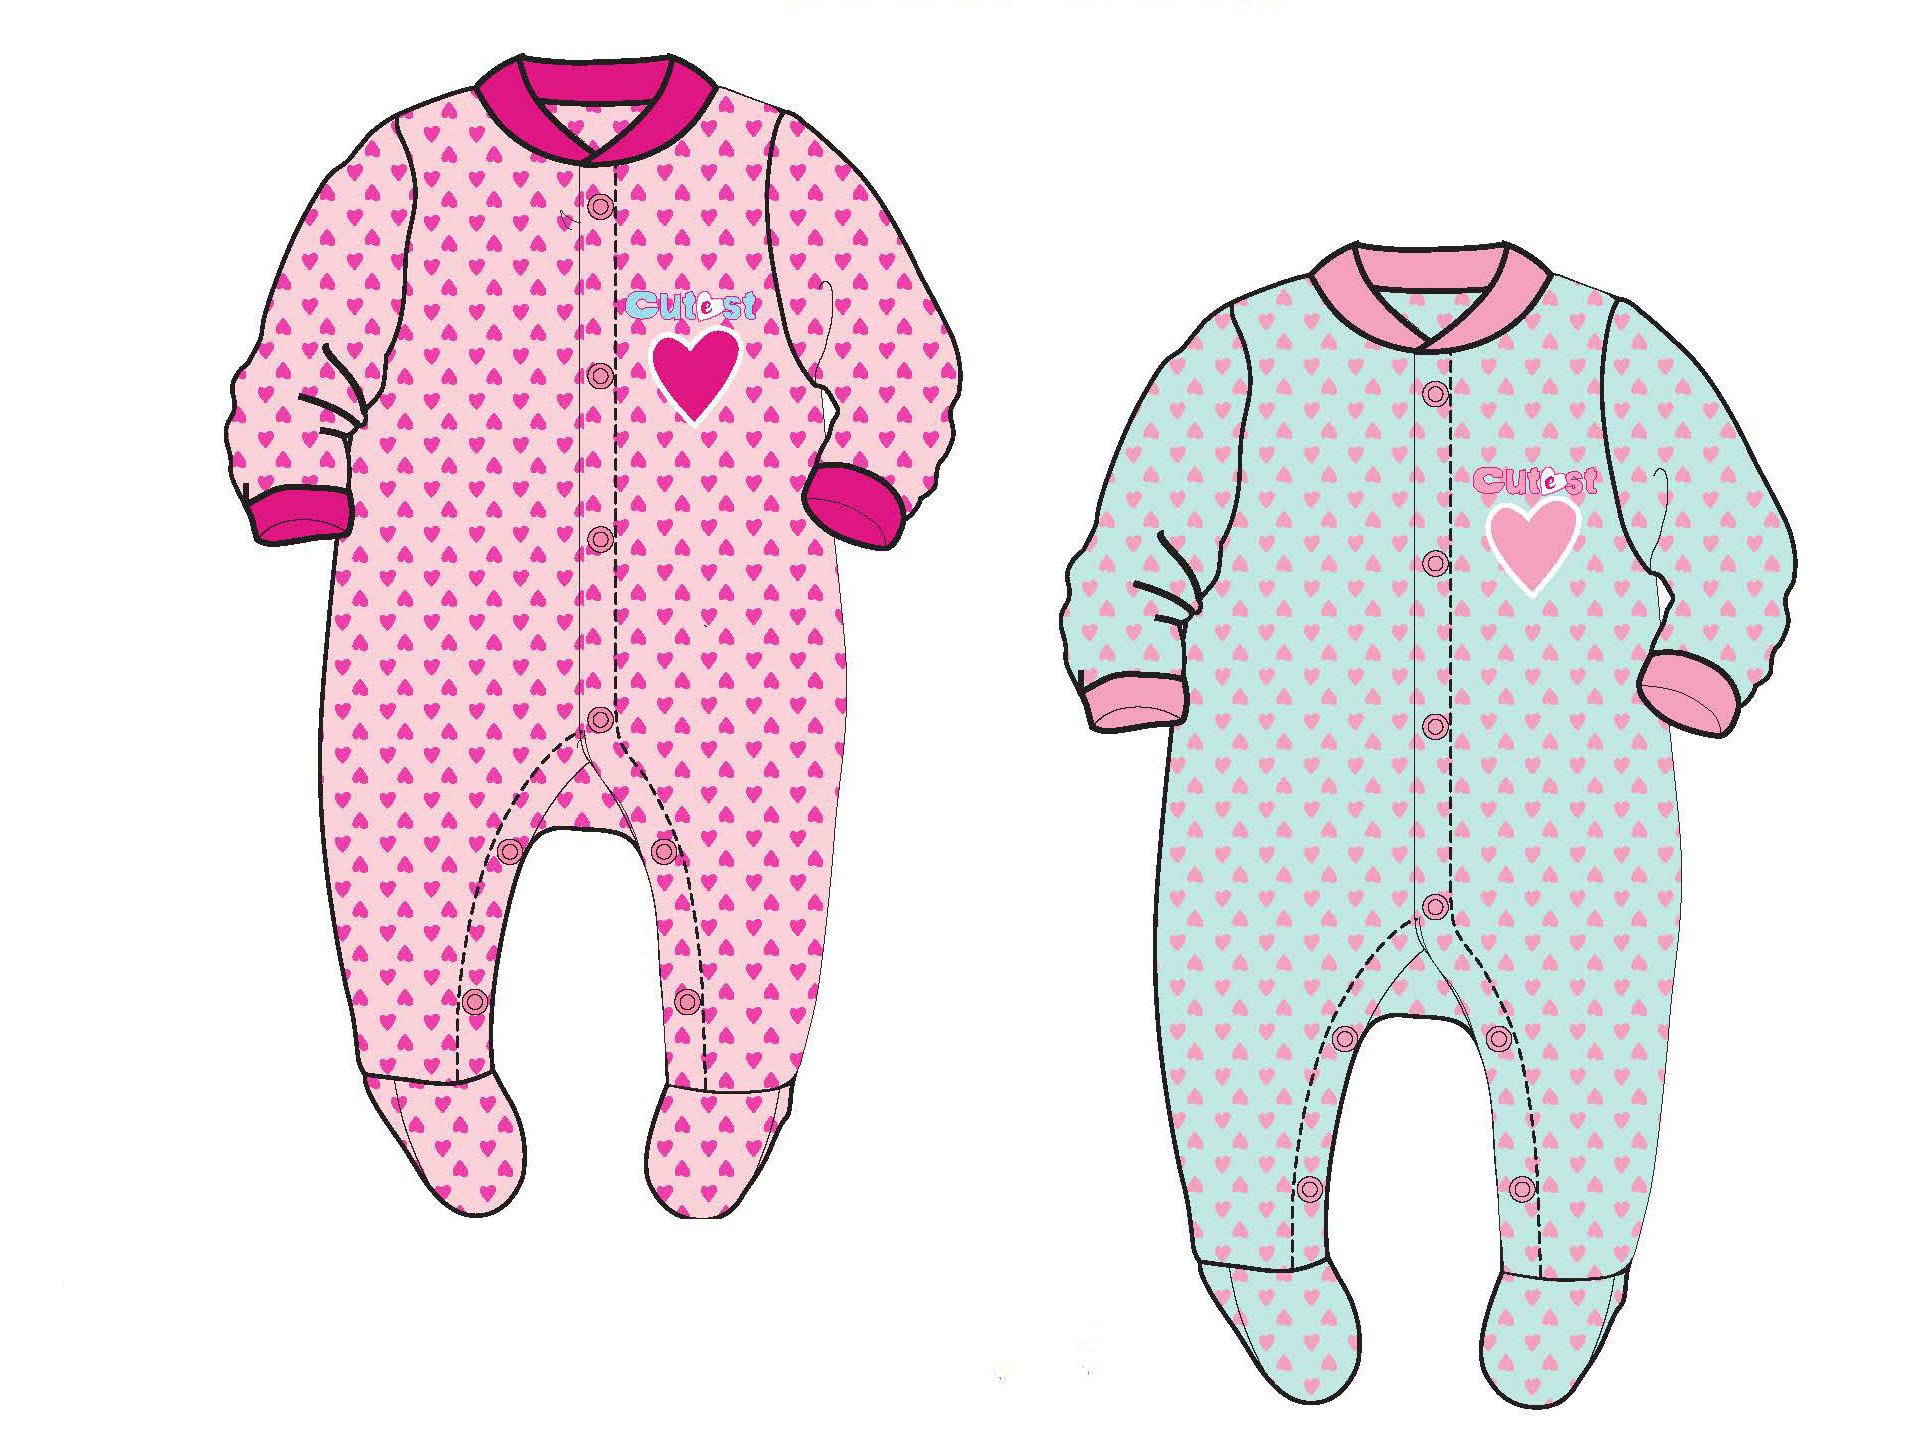 Baby Girl's Knit One-Piece Footed PAJAMAS w/ Embroidered Heart Print - Sizes 0/3M-9M